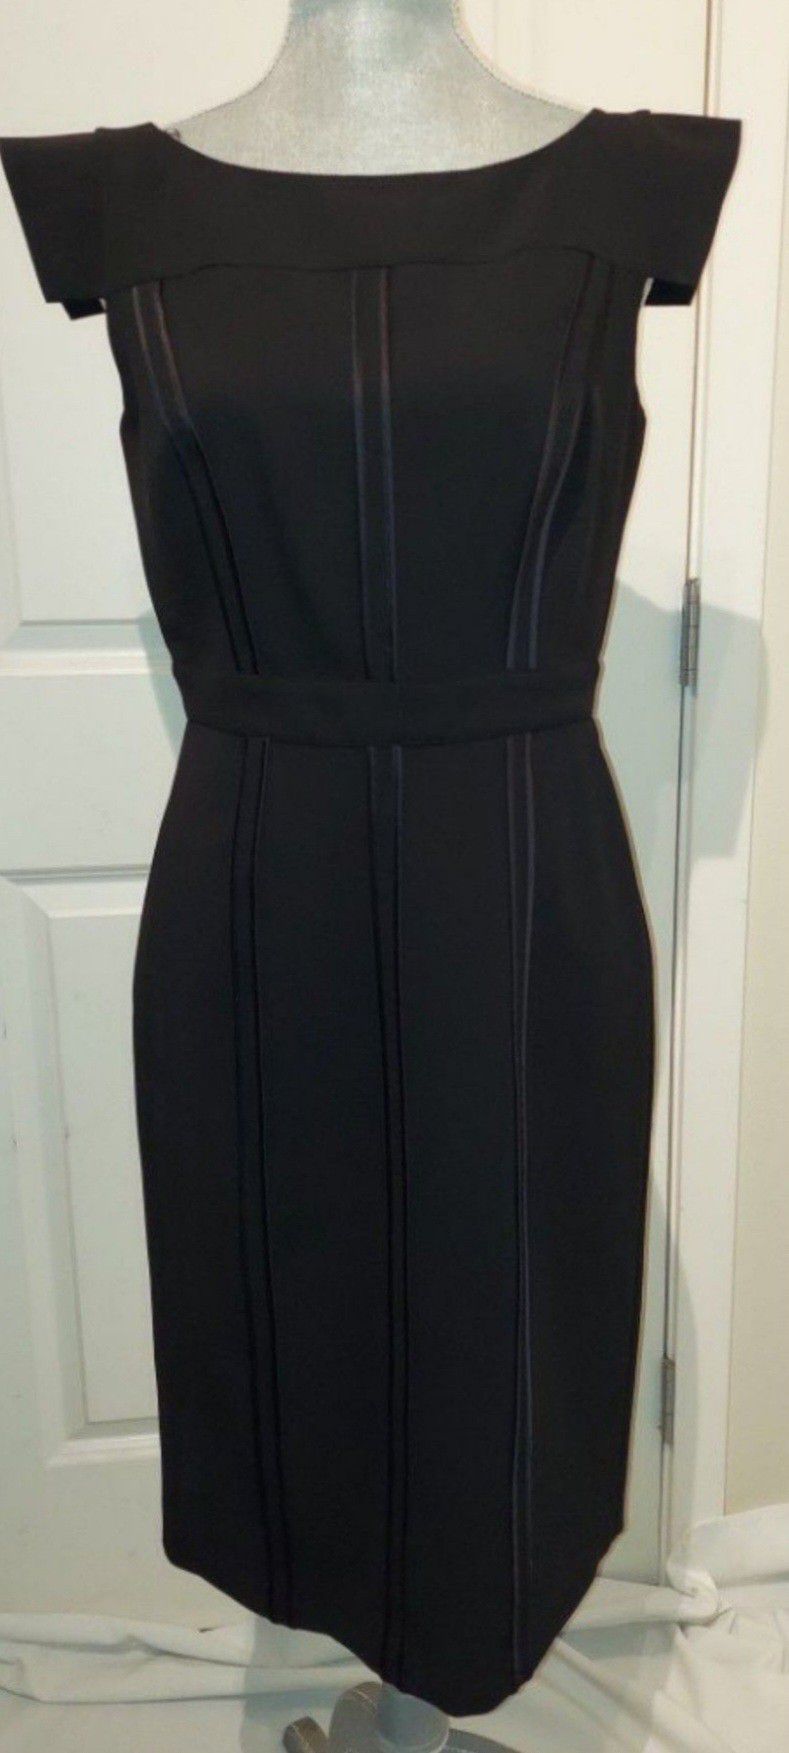  BLACK VINCE CAMUTO BRAND DRESS 🖤PRICE HAS BEEN REDUCED 🖤